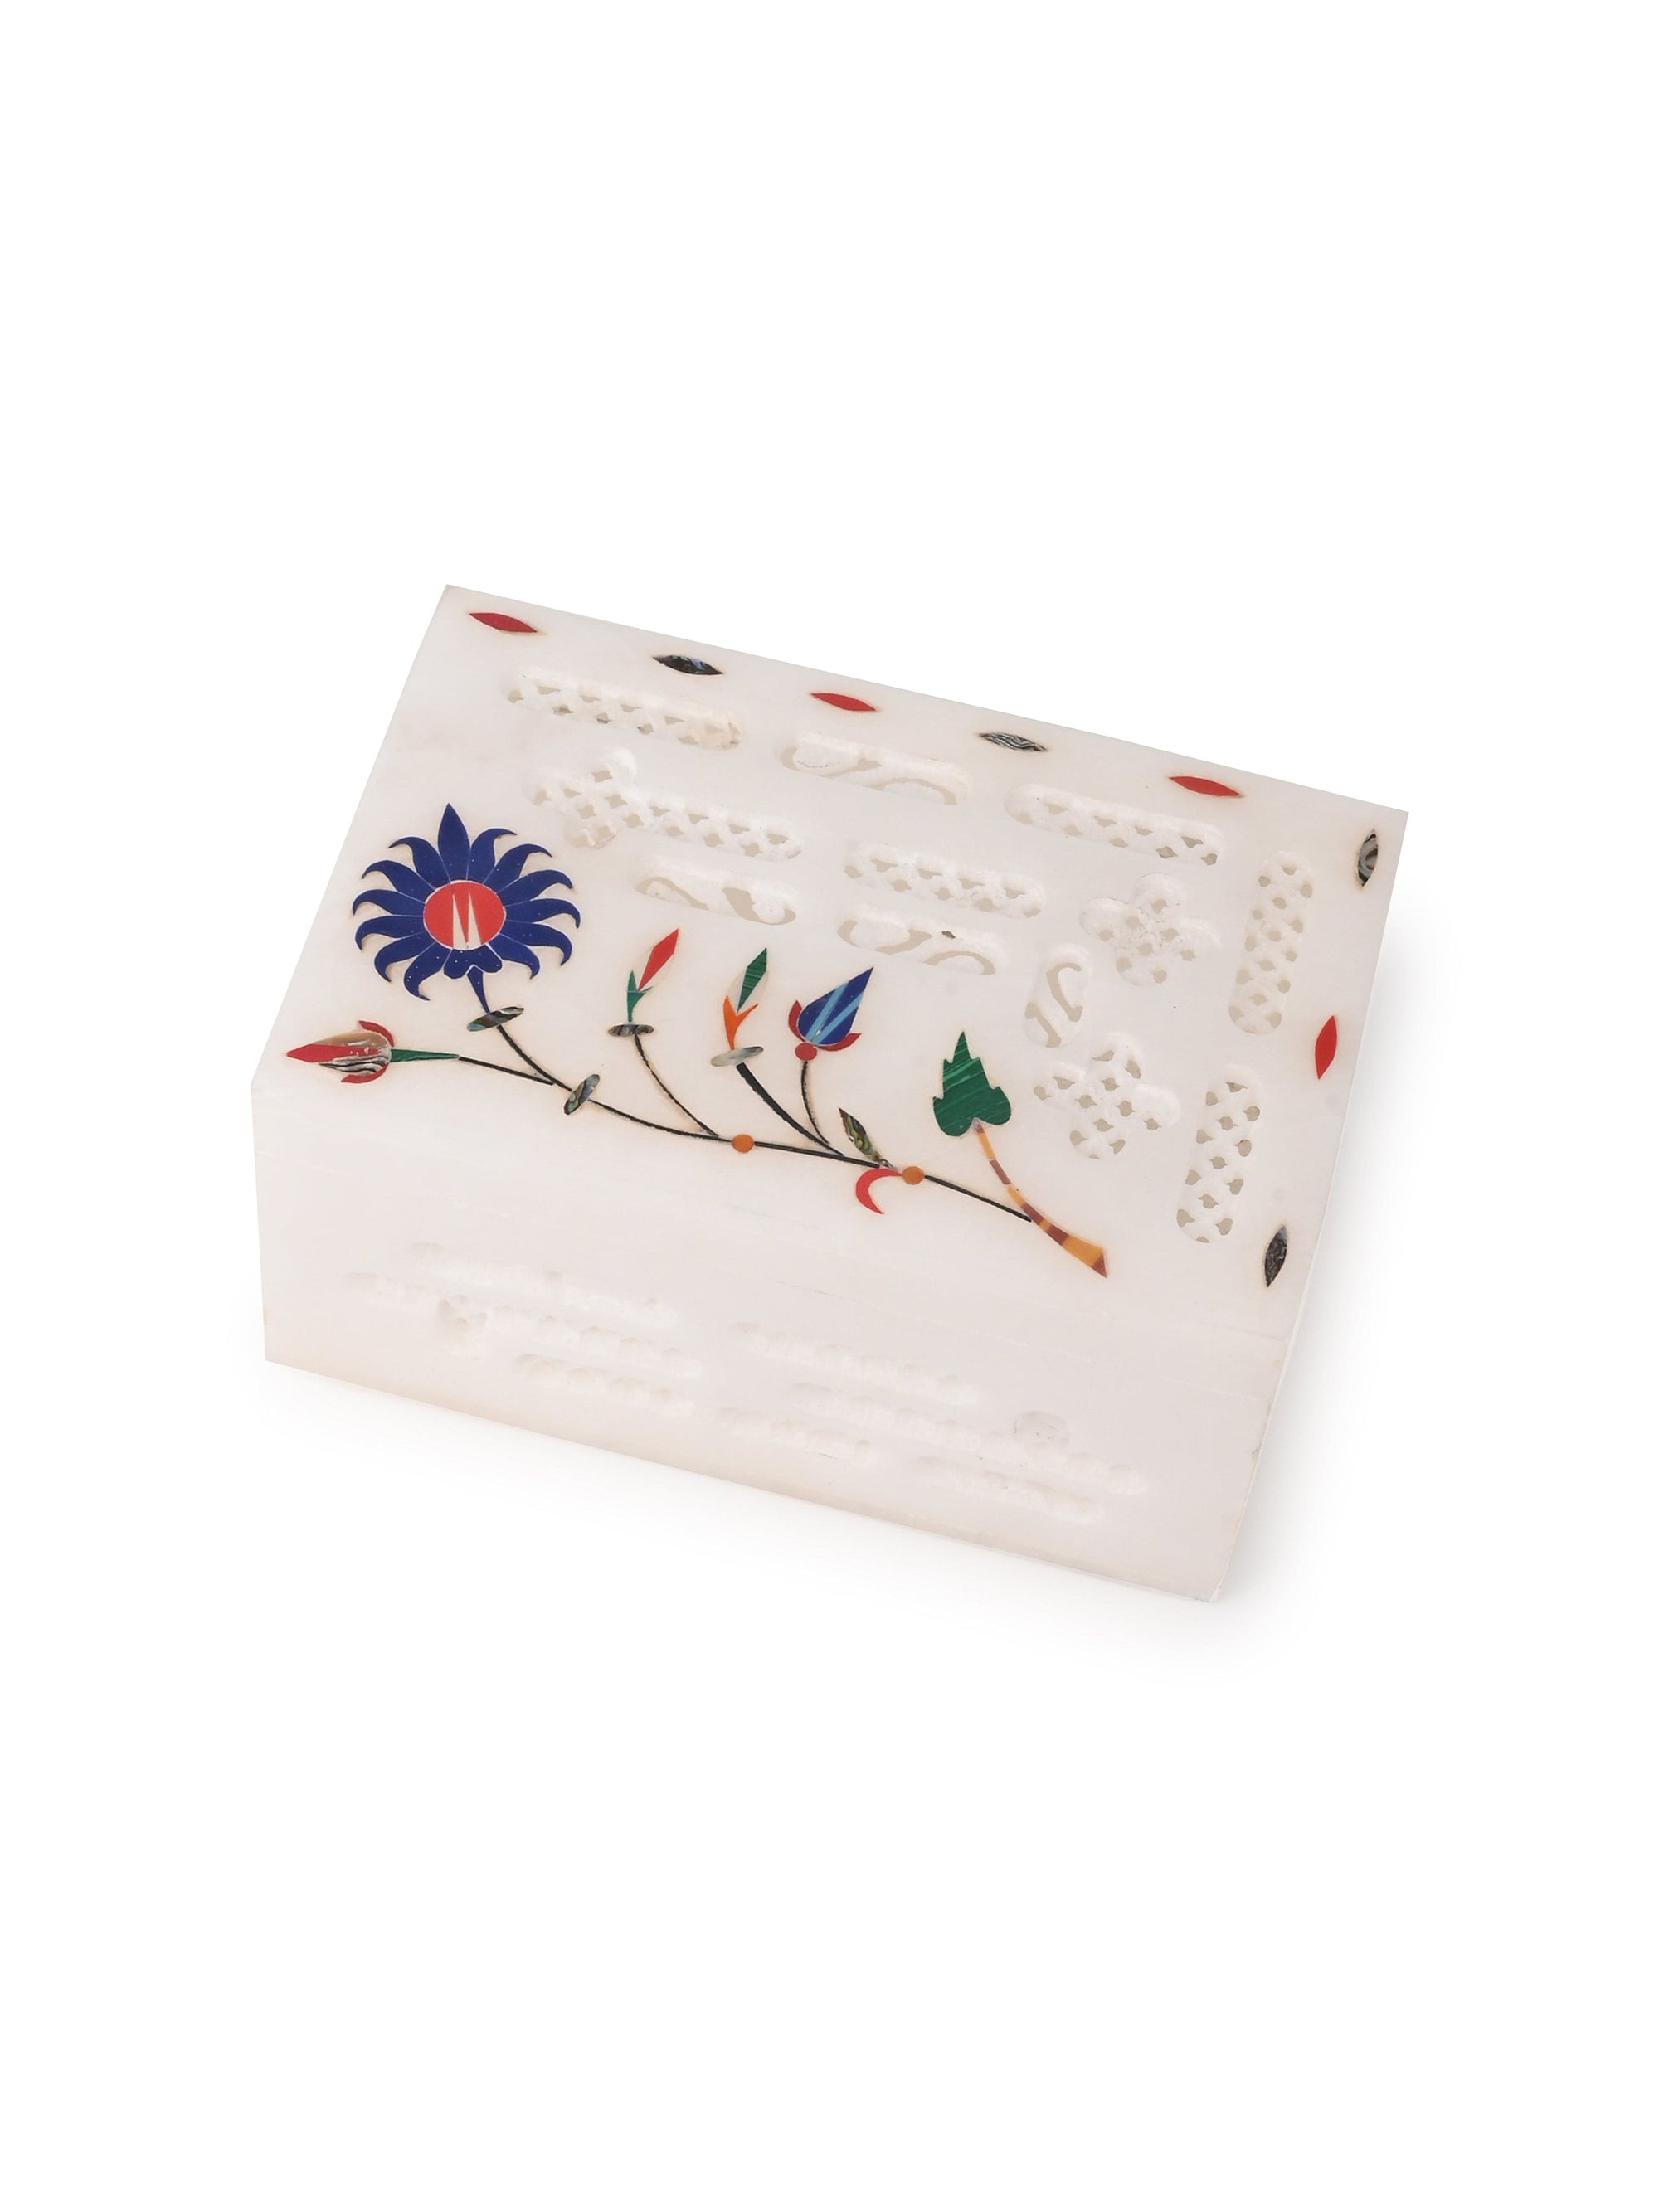 White Marble Jewellery Box with Intricate Carving and Inlay work